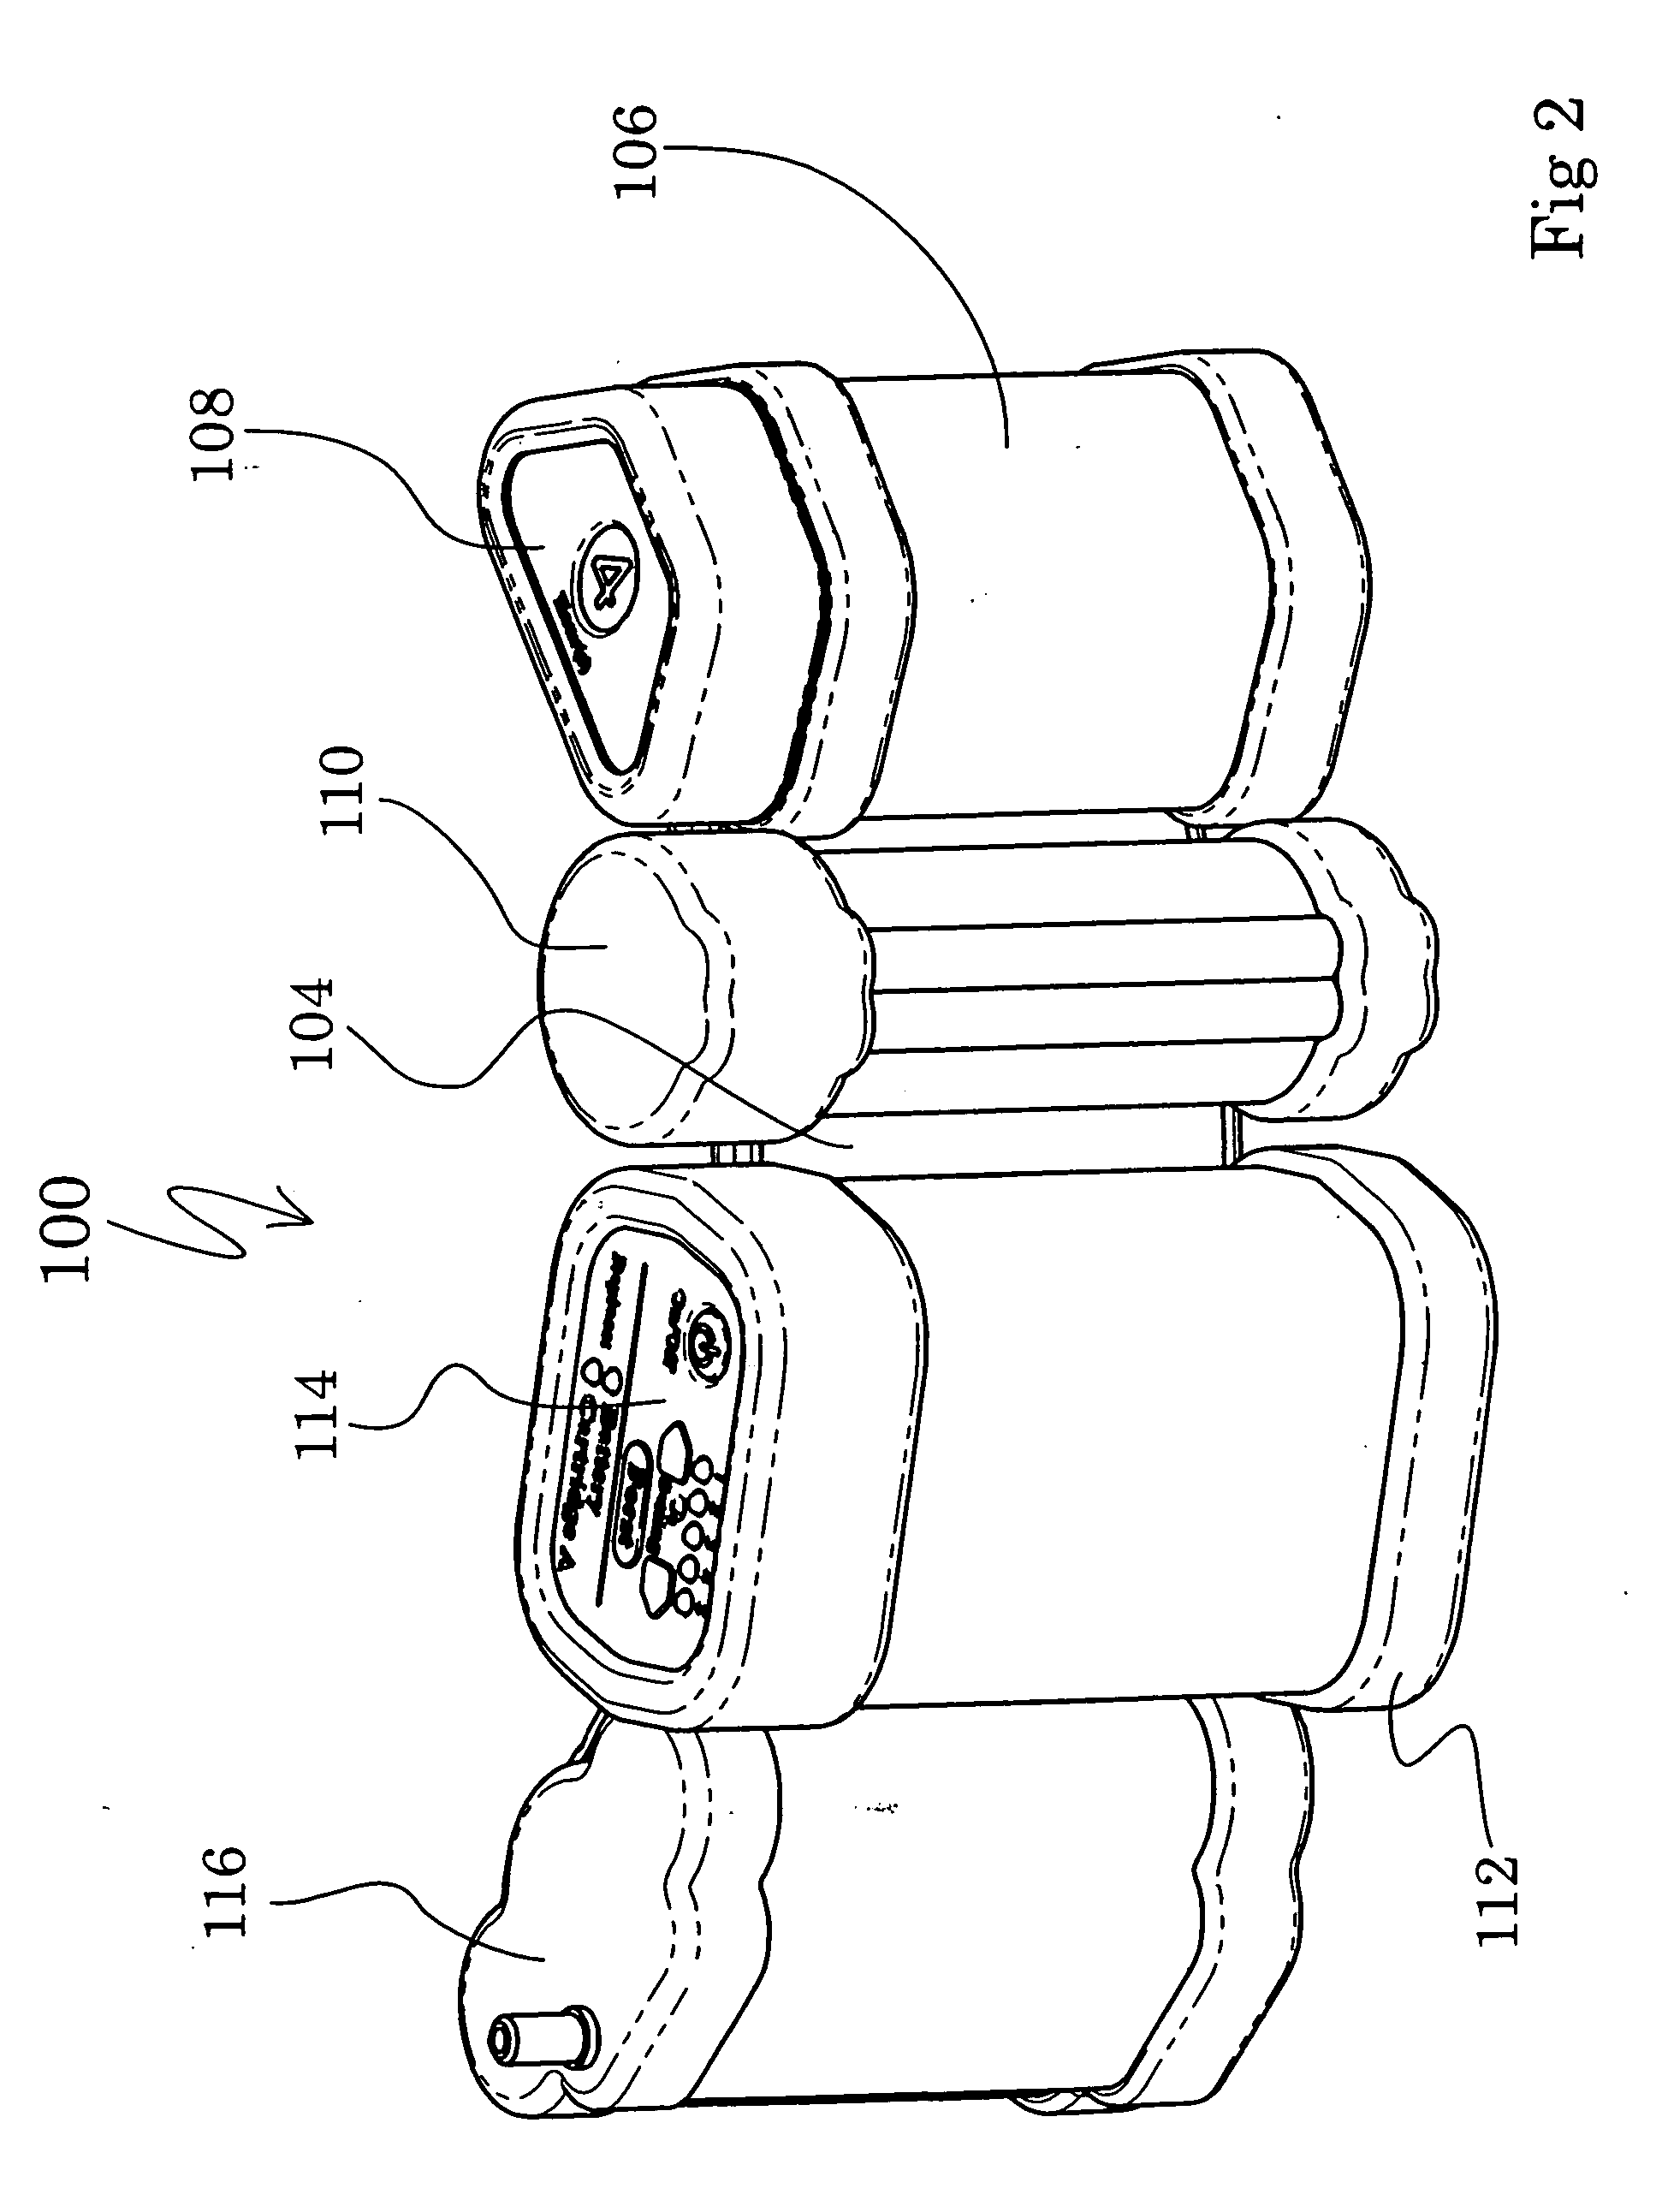 Ambulatory oxygen concentrator containing a power pack